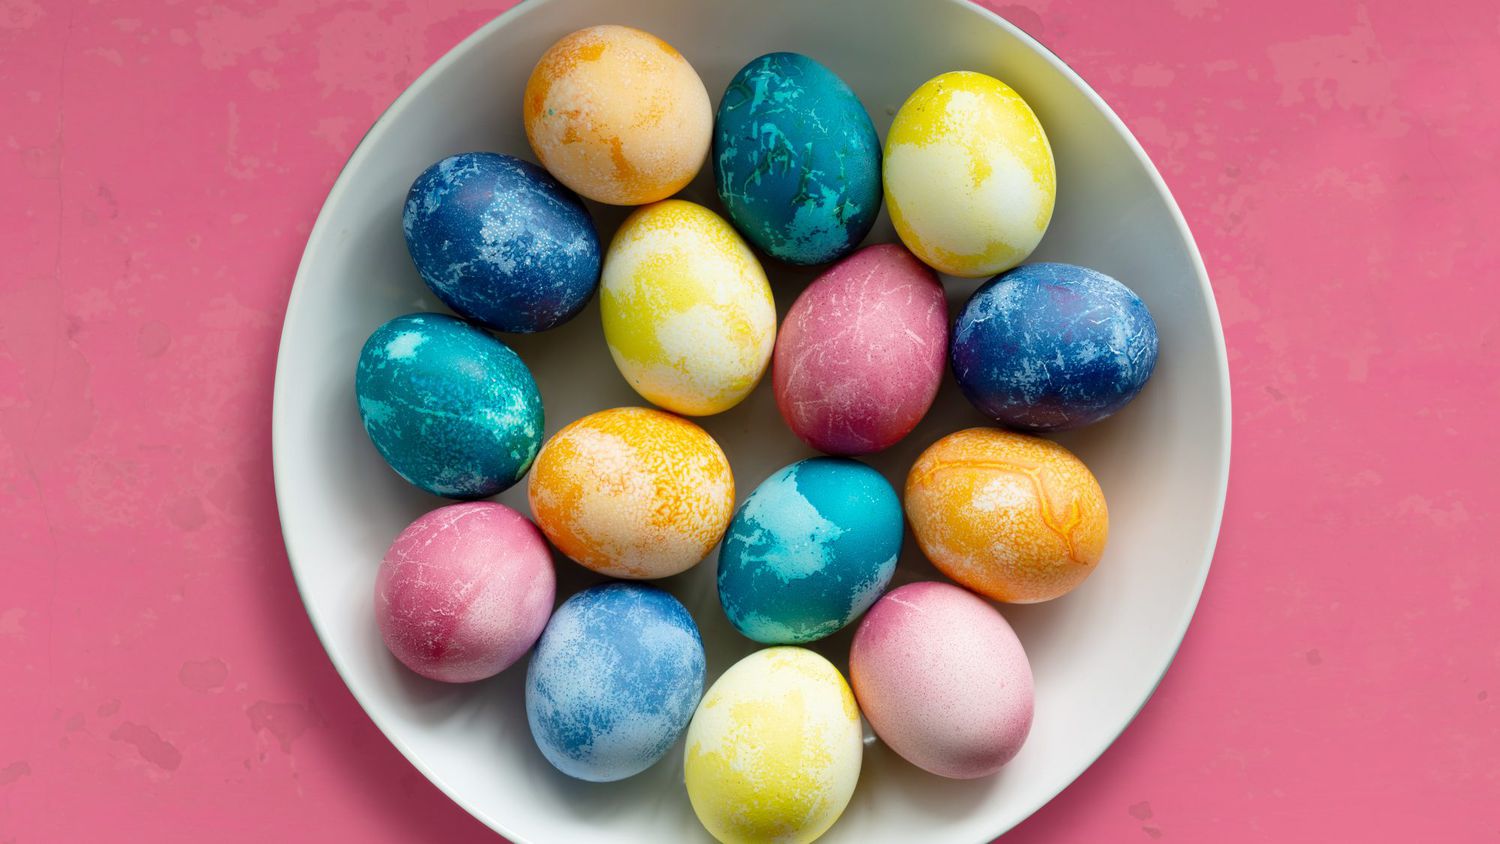 homemade easter egg dyes - round-up of dye colors